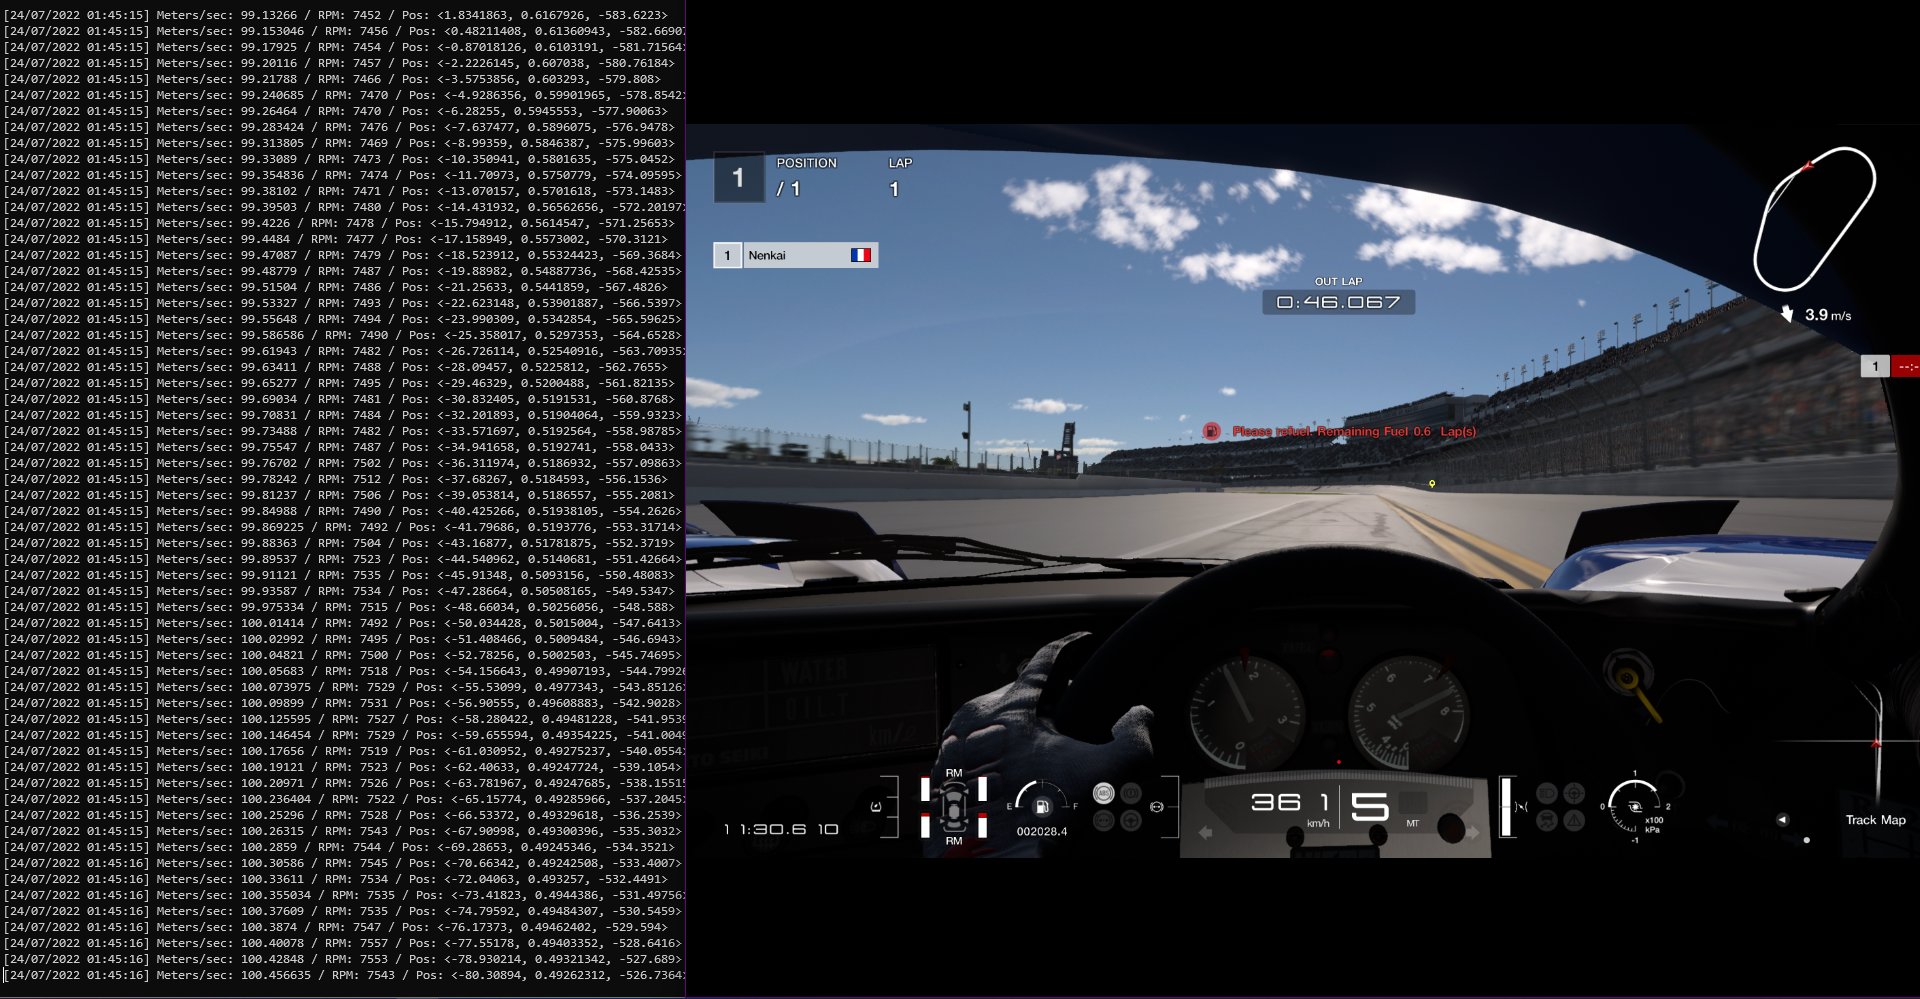 Gran Turismo 7 Review - Great Driving Simulator Ruined By Slimy